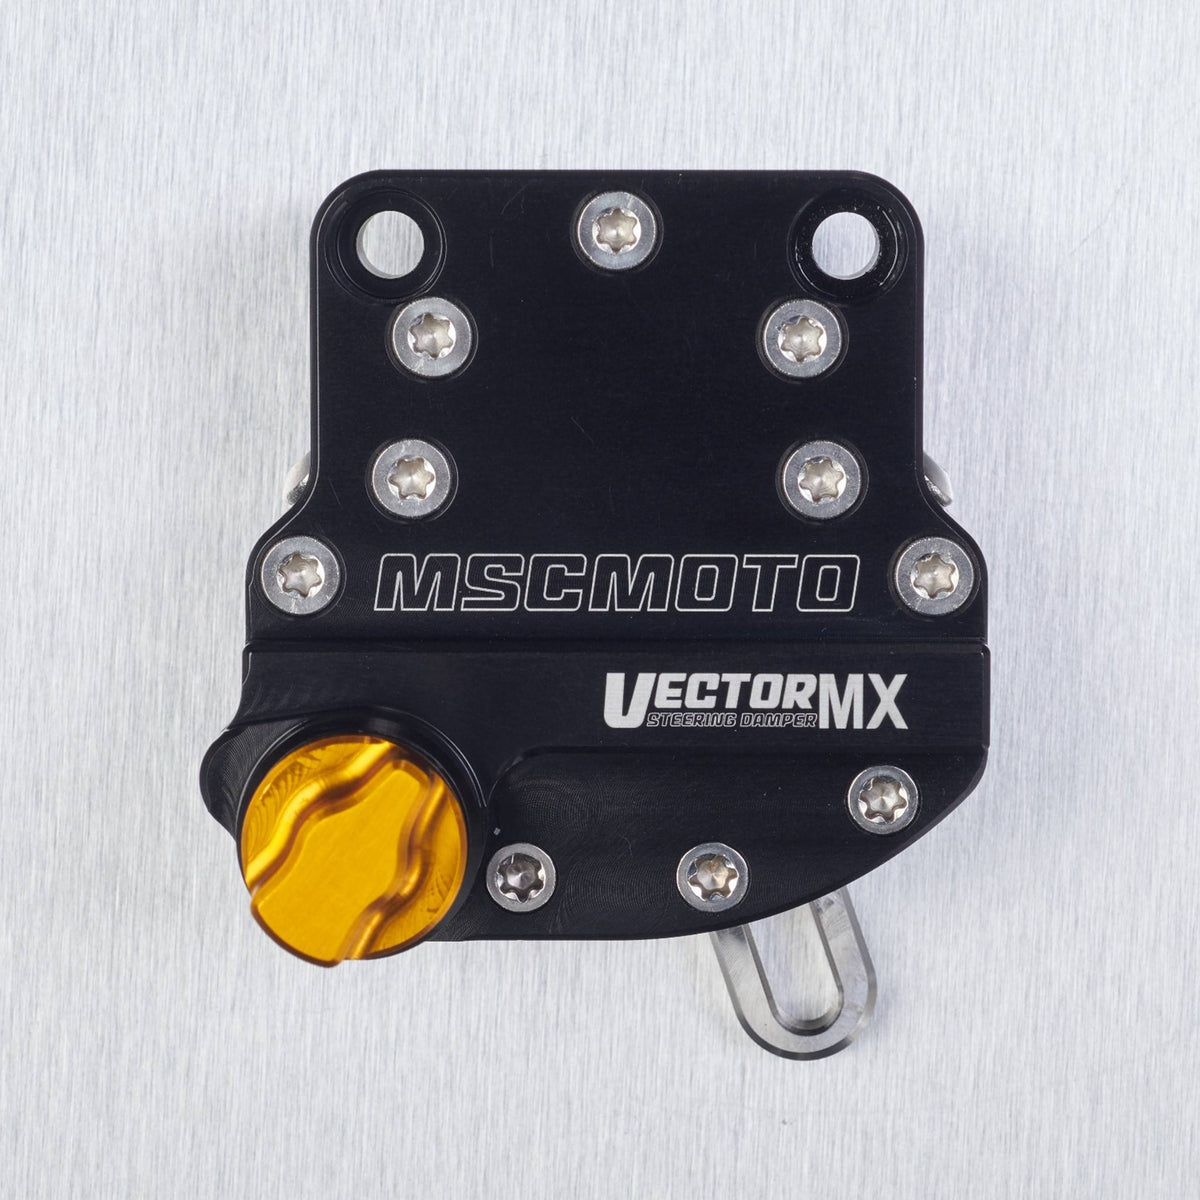 mscmotousa, VectorMX Steering Damper Kit &quot;Down Under&quot; Mount (VEC0005) - KTM (SX, SX-F, XC-F) HUSQVARNA (TC, FC, FX), VEC0005, husqvarna, husqvarna-2016-tc-125-esi1443929, ktm, ktm-2016-125-sx-esi6893684, vectormx, , Imported and distributed in North &amp; South America by Lindeco Genuine Powersports.